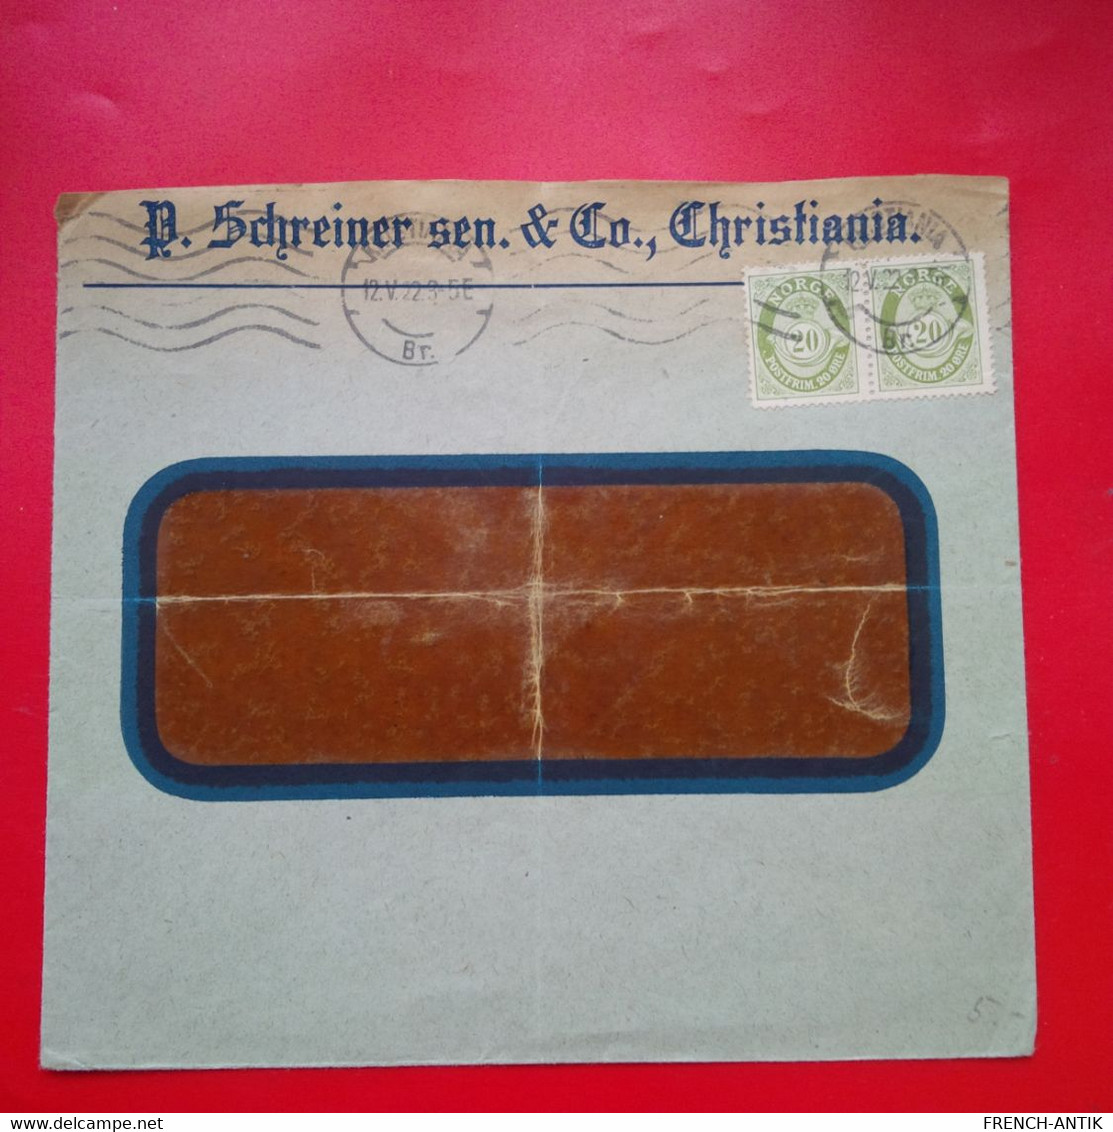 LETTRE CHRISTIANIA NORGE SCHREINER - Covers & Documents